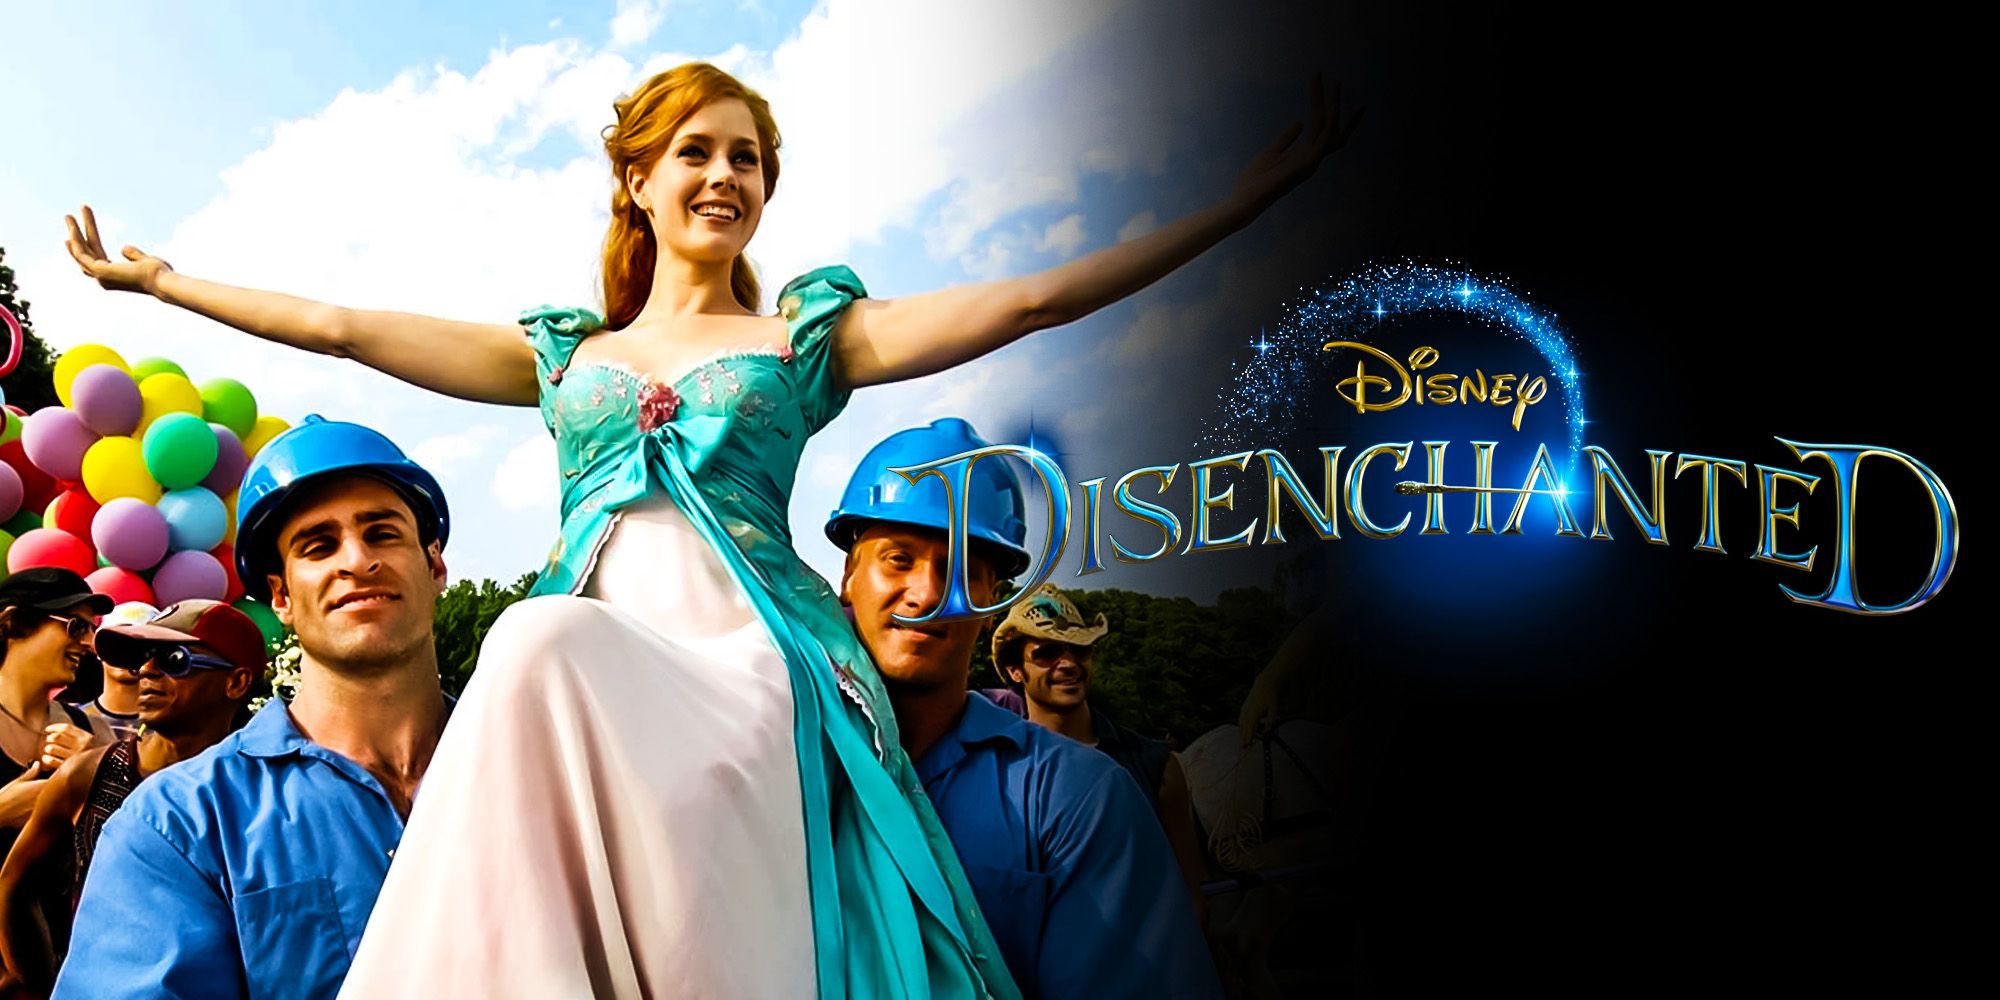 A promo image for Disenchanted